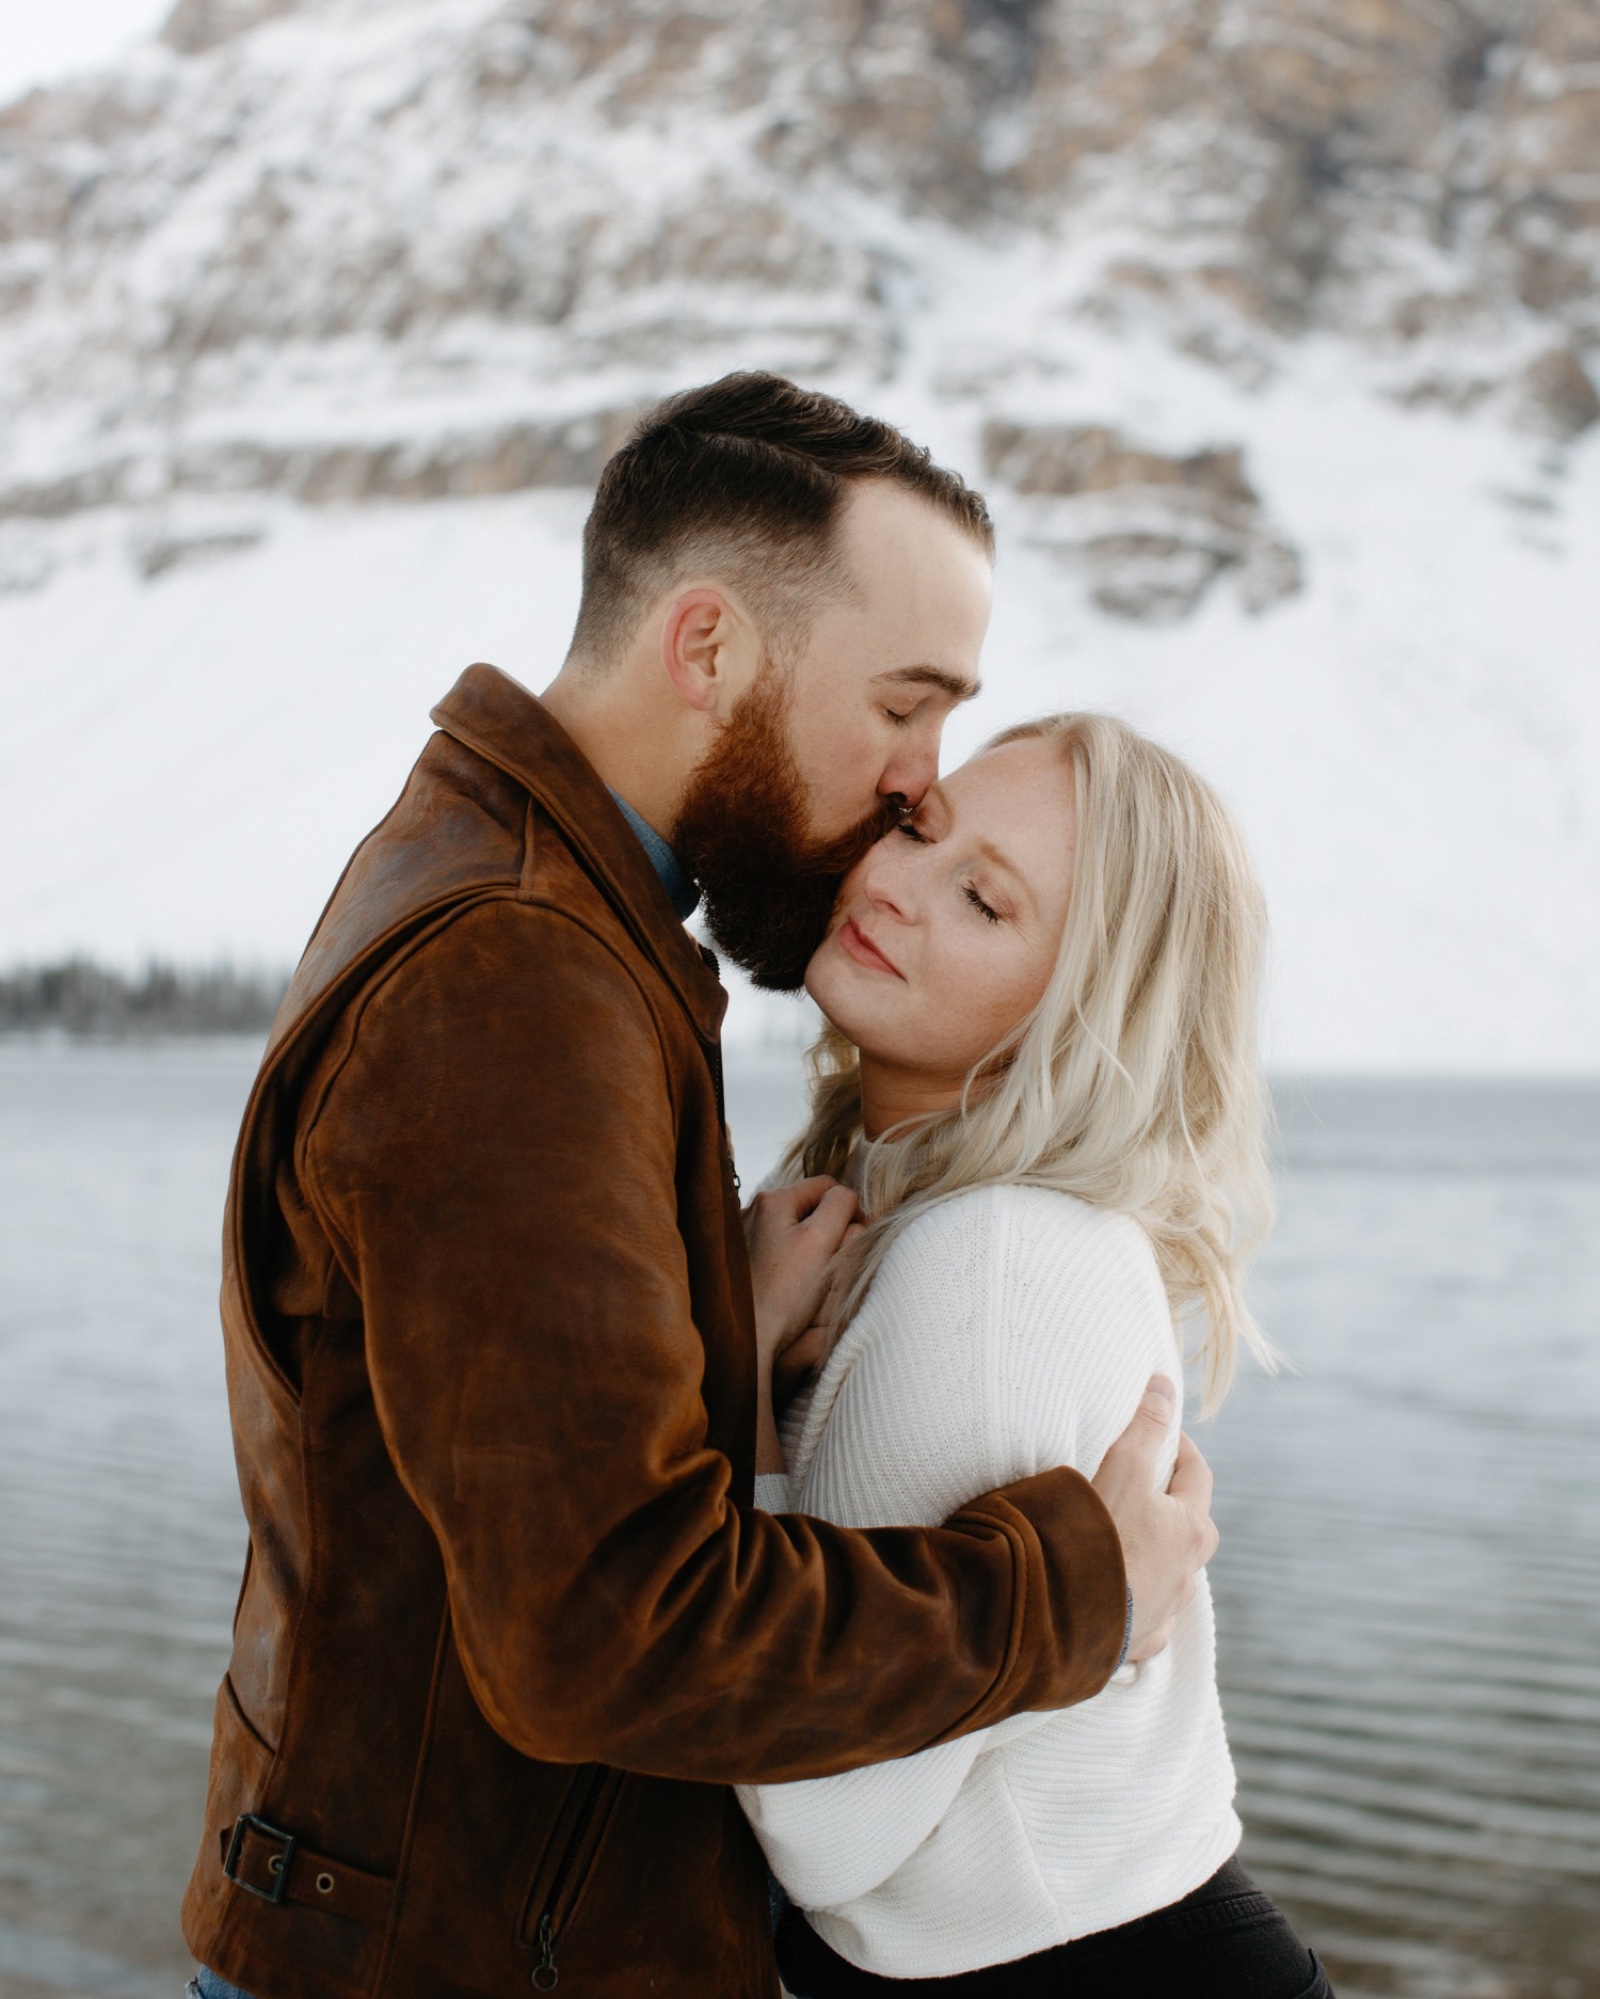 An anniversary photography session with a couple visiting from Texas at Bow Lake after a snow storm